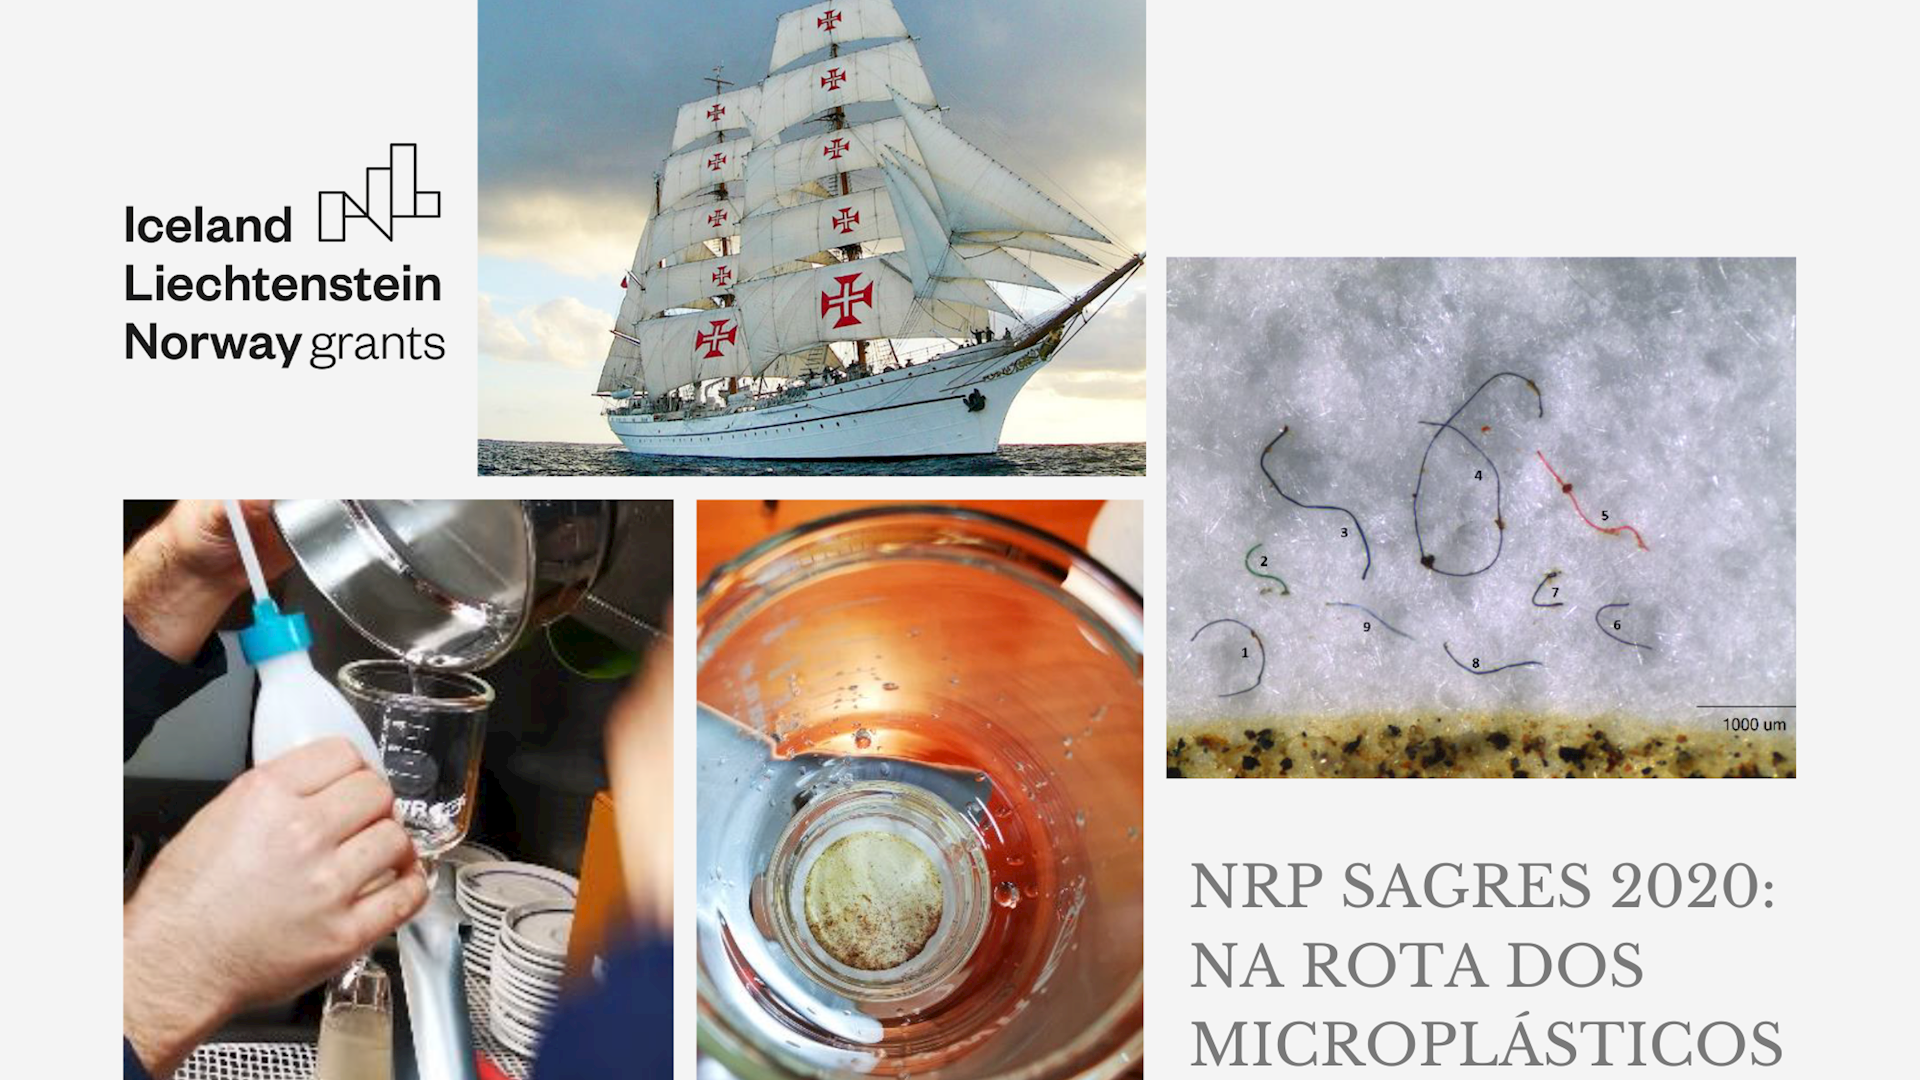 PDP 05 - NRP Sagres 2020: On the route of microplastics